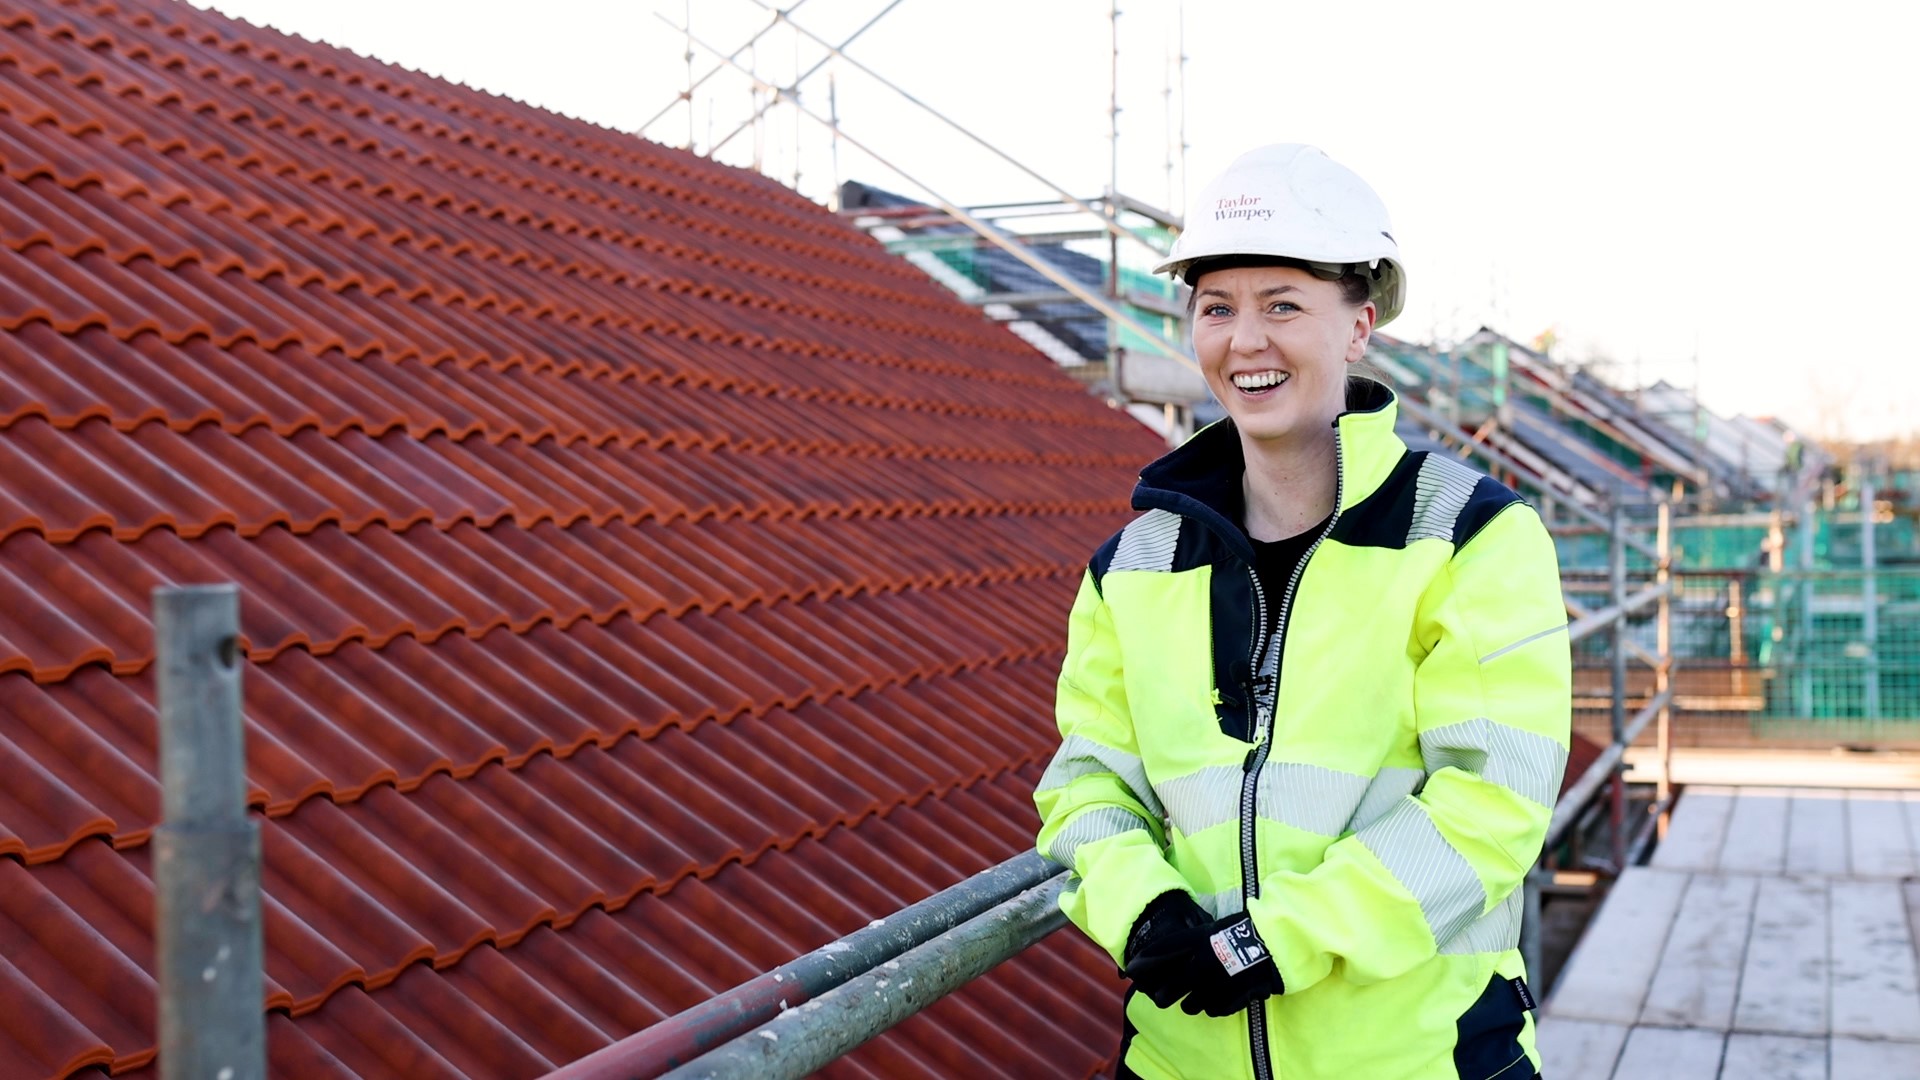 Taylor Wimpey shows support for Scottish Apprenticeship Week with new video